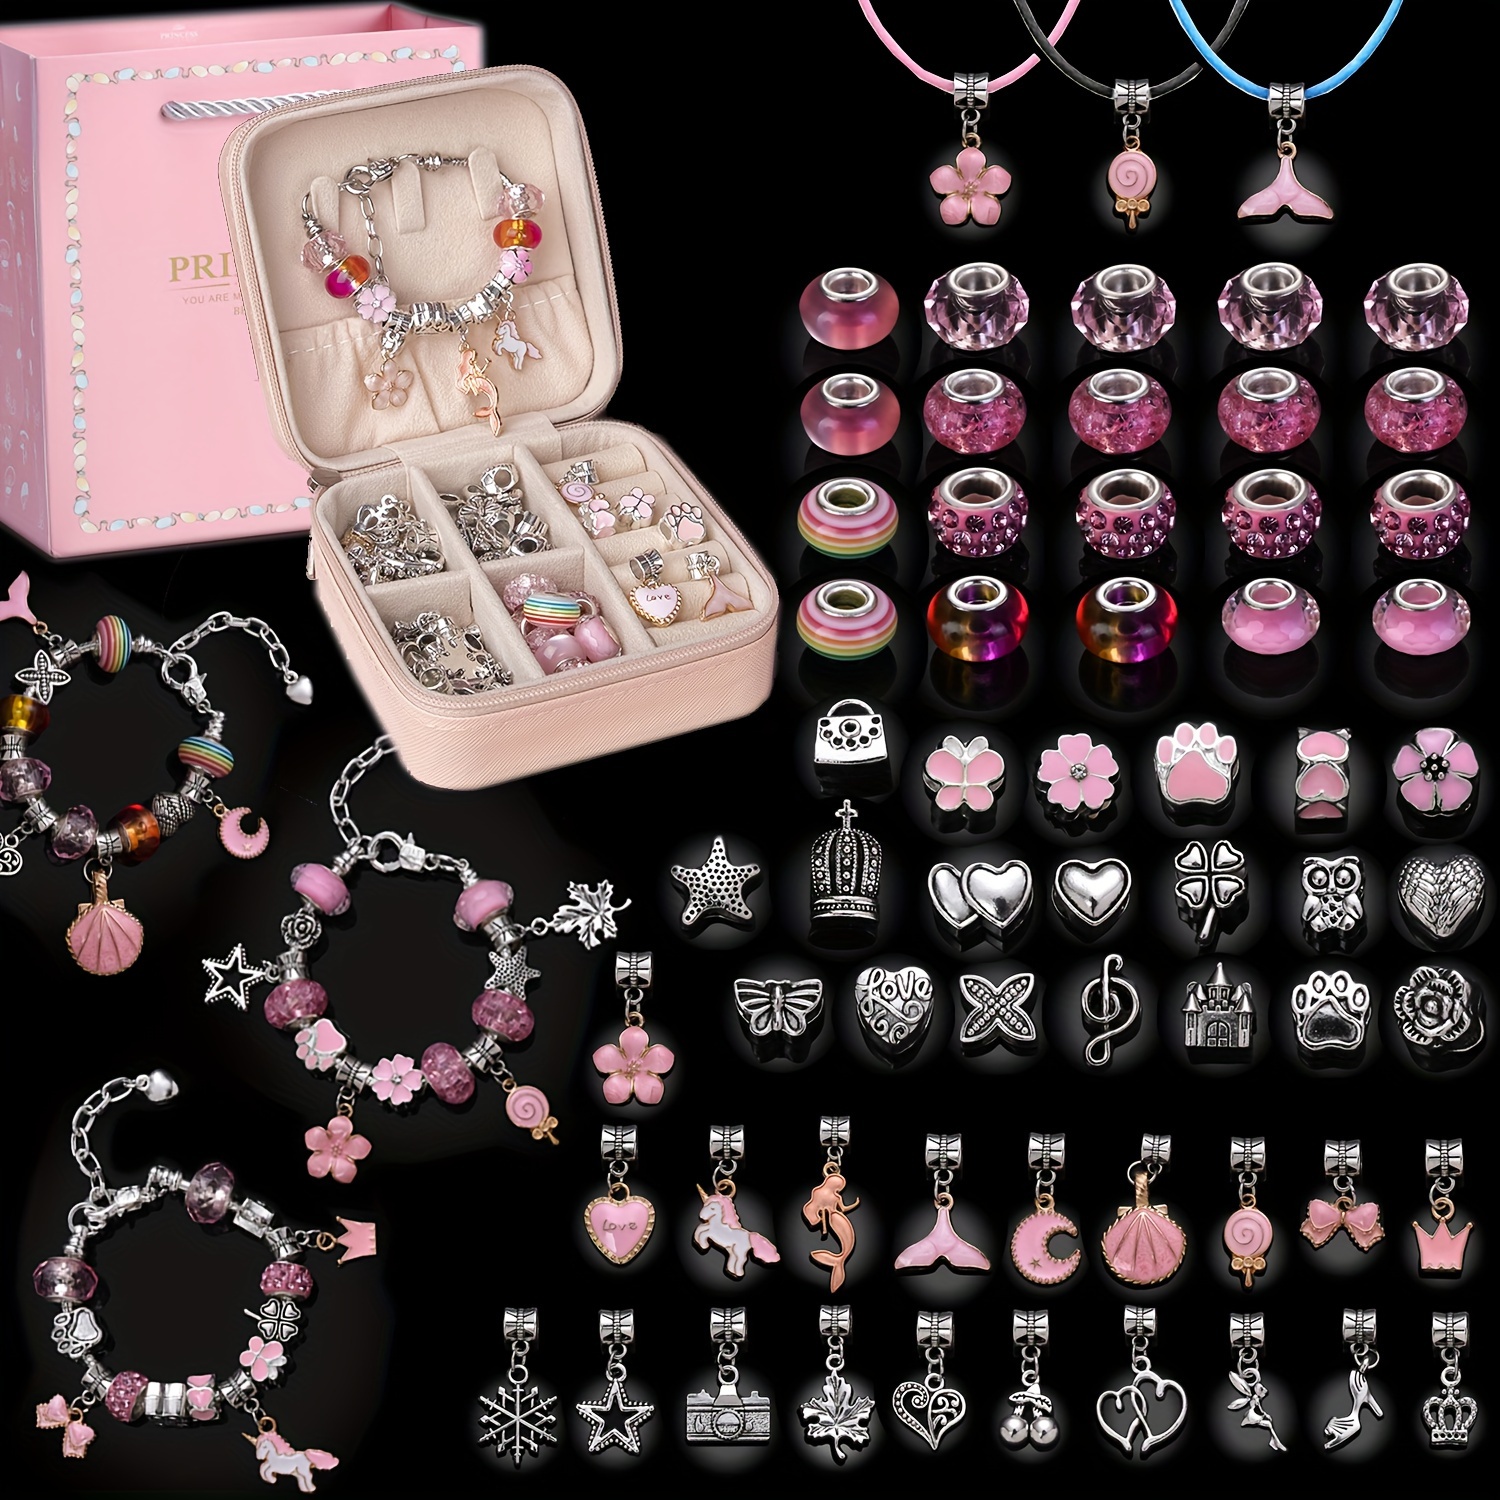 66Pcs Charm Bracelet Neckalce DIY Jewelry Making Kit For Girls, With Beads,  Pendants, Snake Chains, Rope, Crafts Gifts Set Teenager Stuff